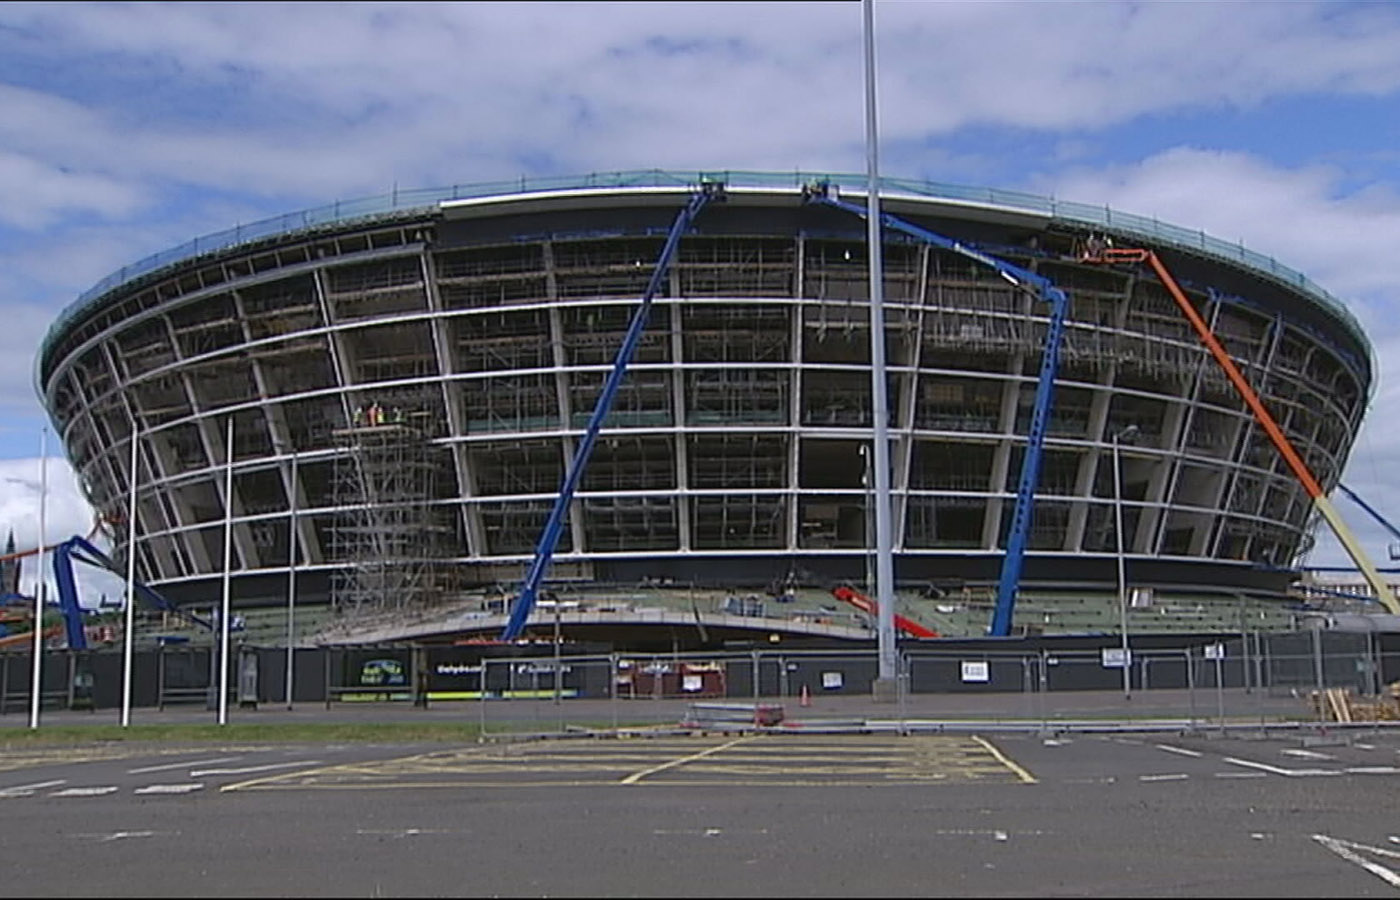 The Hydro under construction in Glasgow.